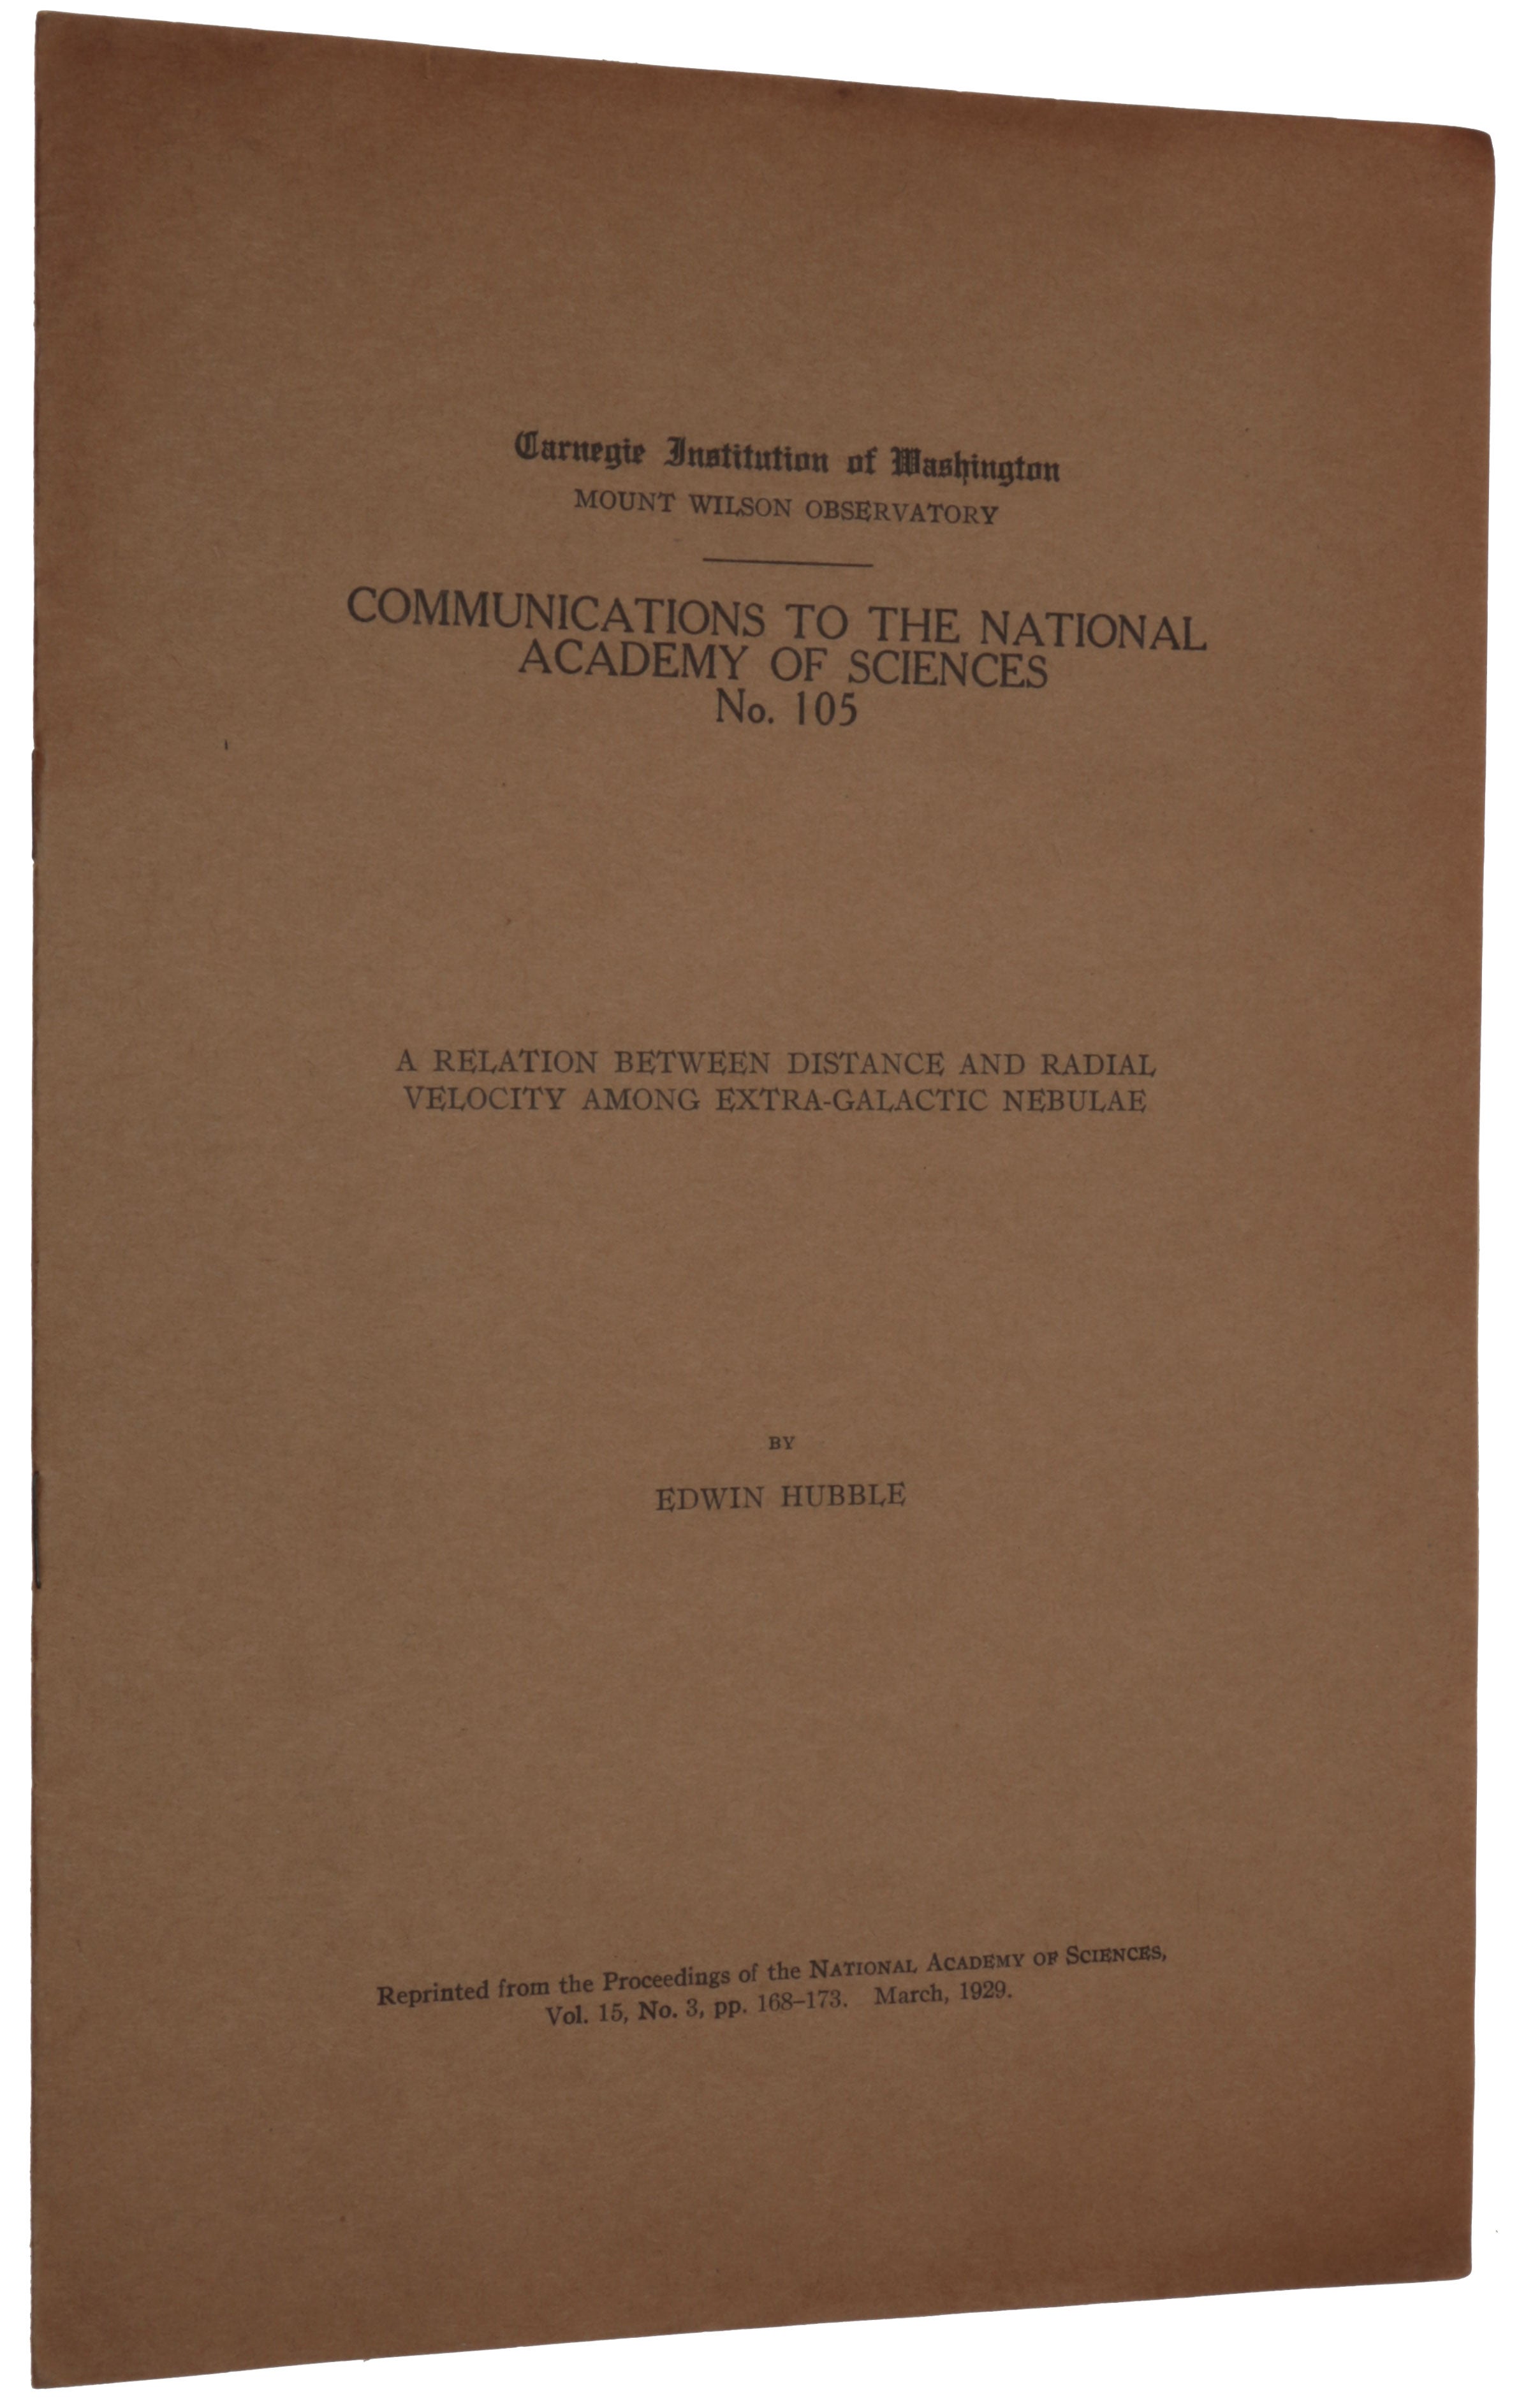 Item #5177 A Relation between Distance and Radial Velocity among Ex-tra-Galactic Nebulae. Offprint from: Proceedings of the National Academy of Sciences, Vol. 15, No. 3, March 1929. Edwin HUBBLE.